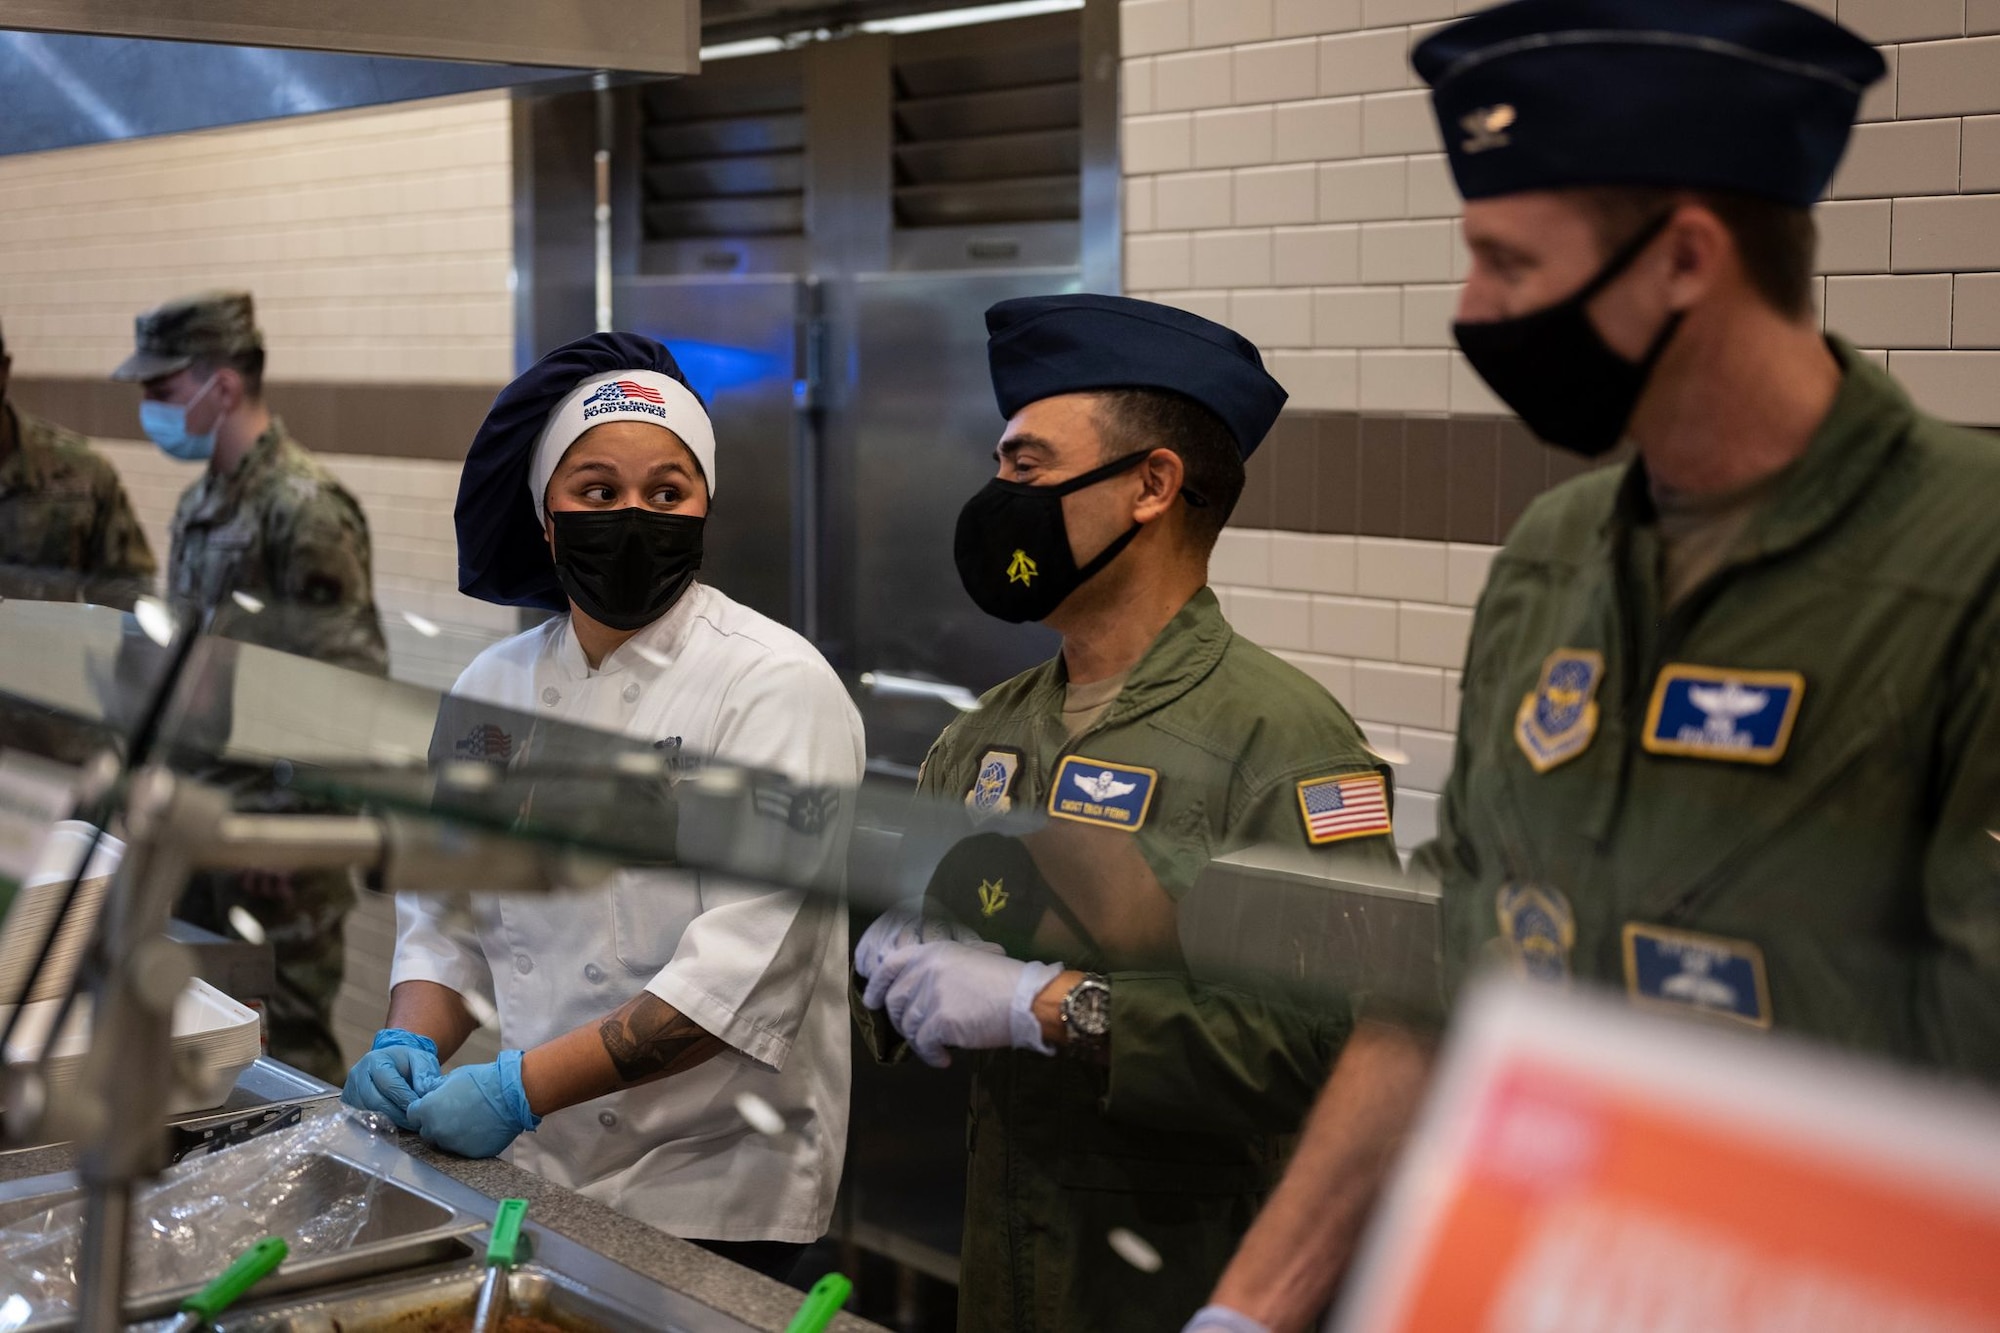 Two men in military uniforms talks to a woman in chef attire along a cafeteria-style line